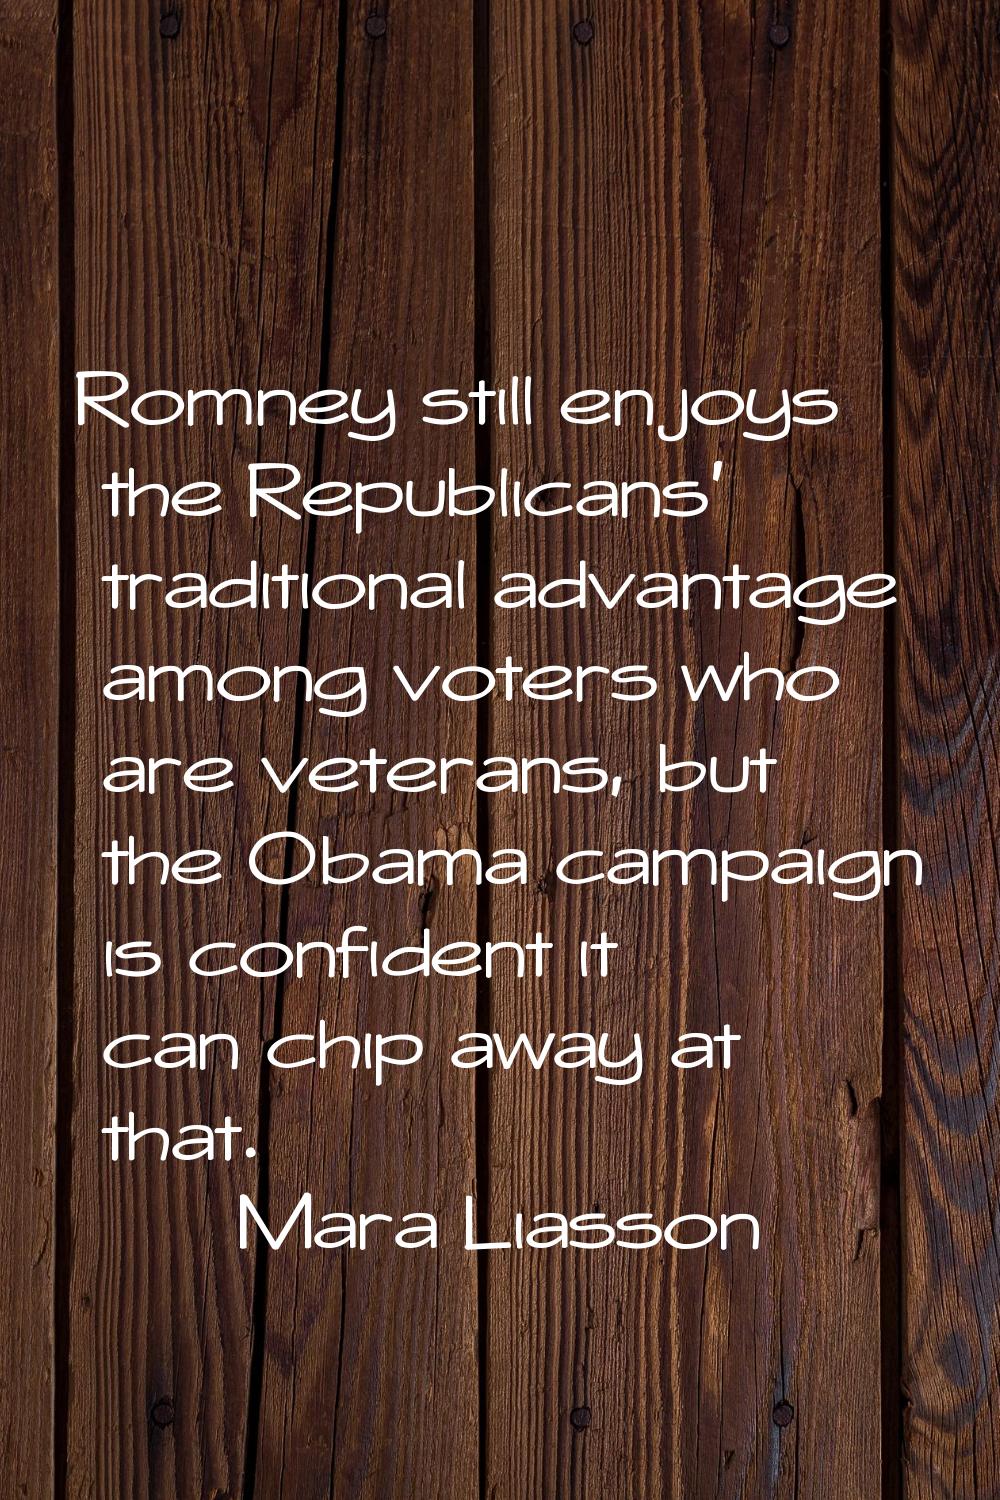 Romney still enjoys the Republicans' traditional advantage among voters who are veterans, but the O